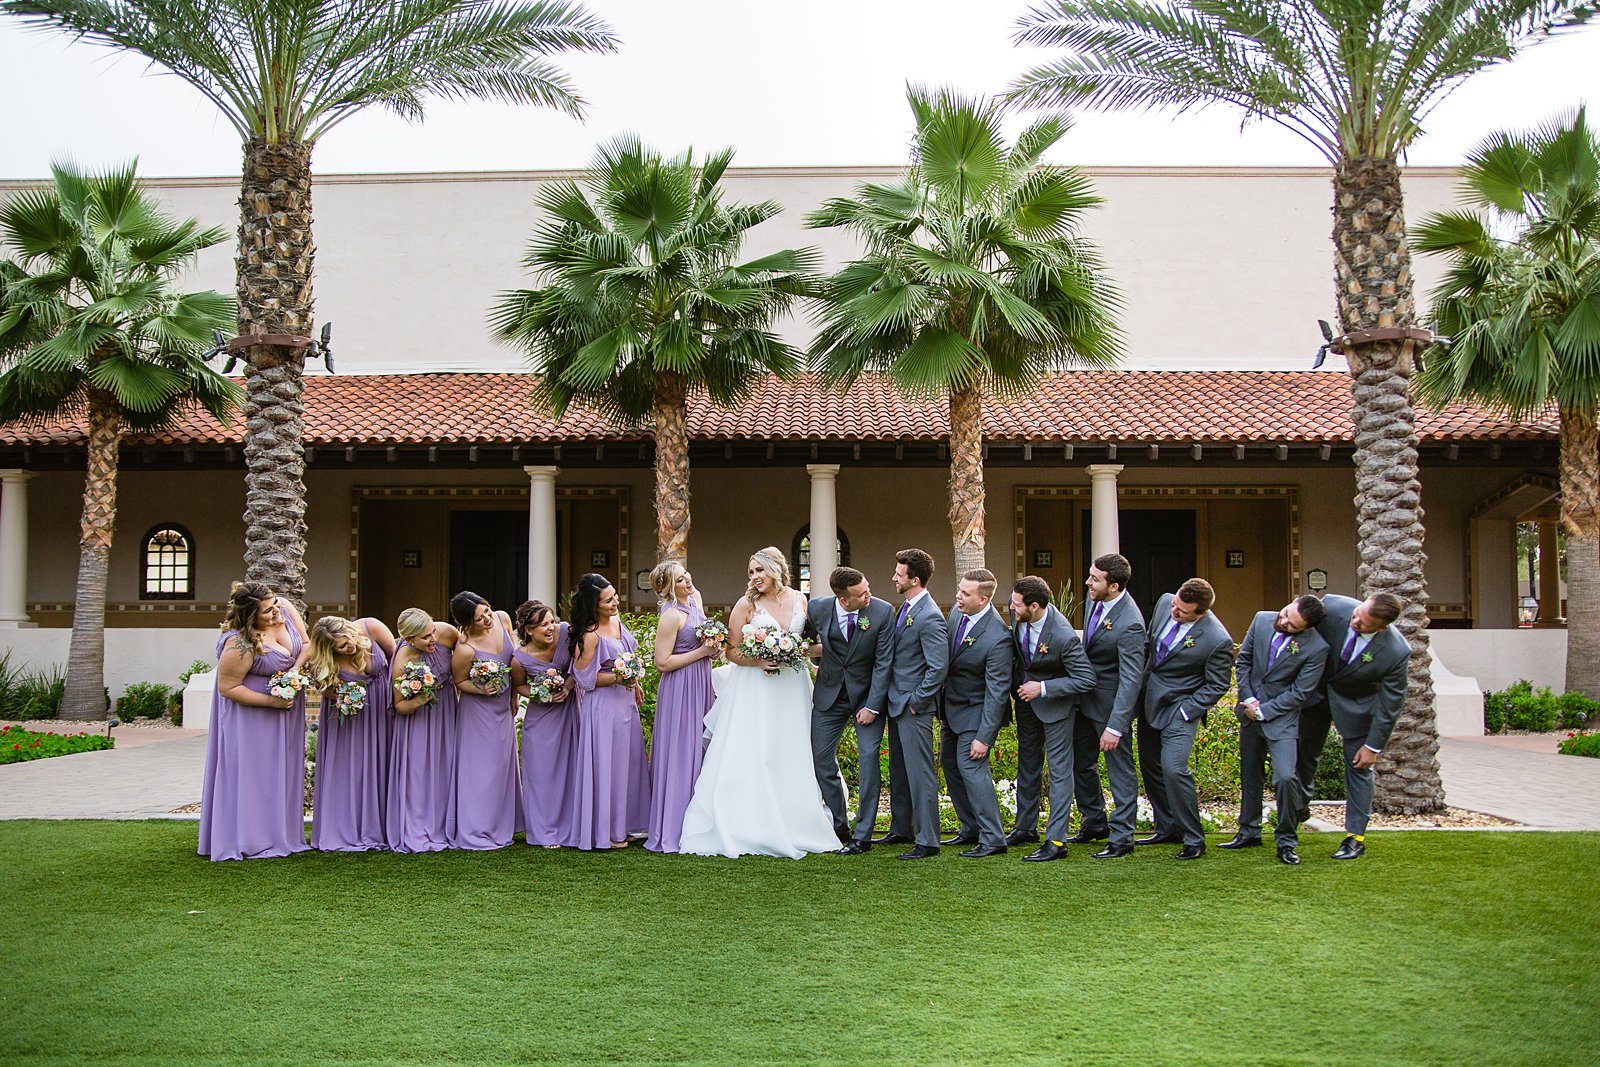 Bridal party laughing together at The Scottsdale Resort at McCormick Ranch wedding by Scottsdale wedding photographer PMA Photography.